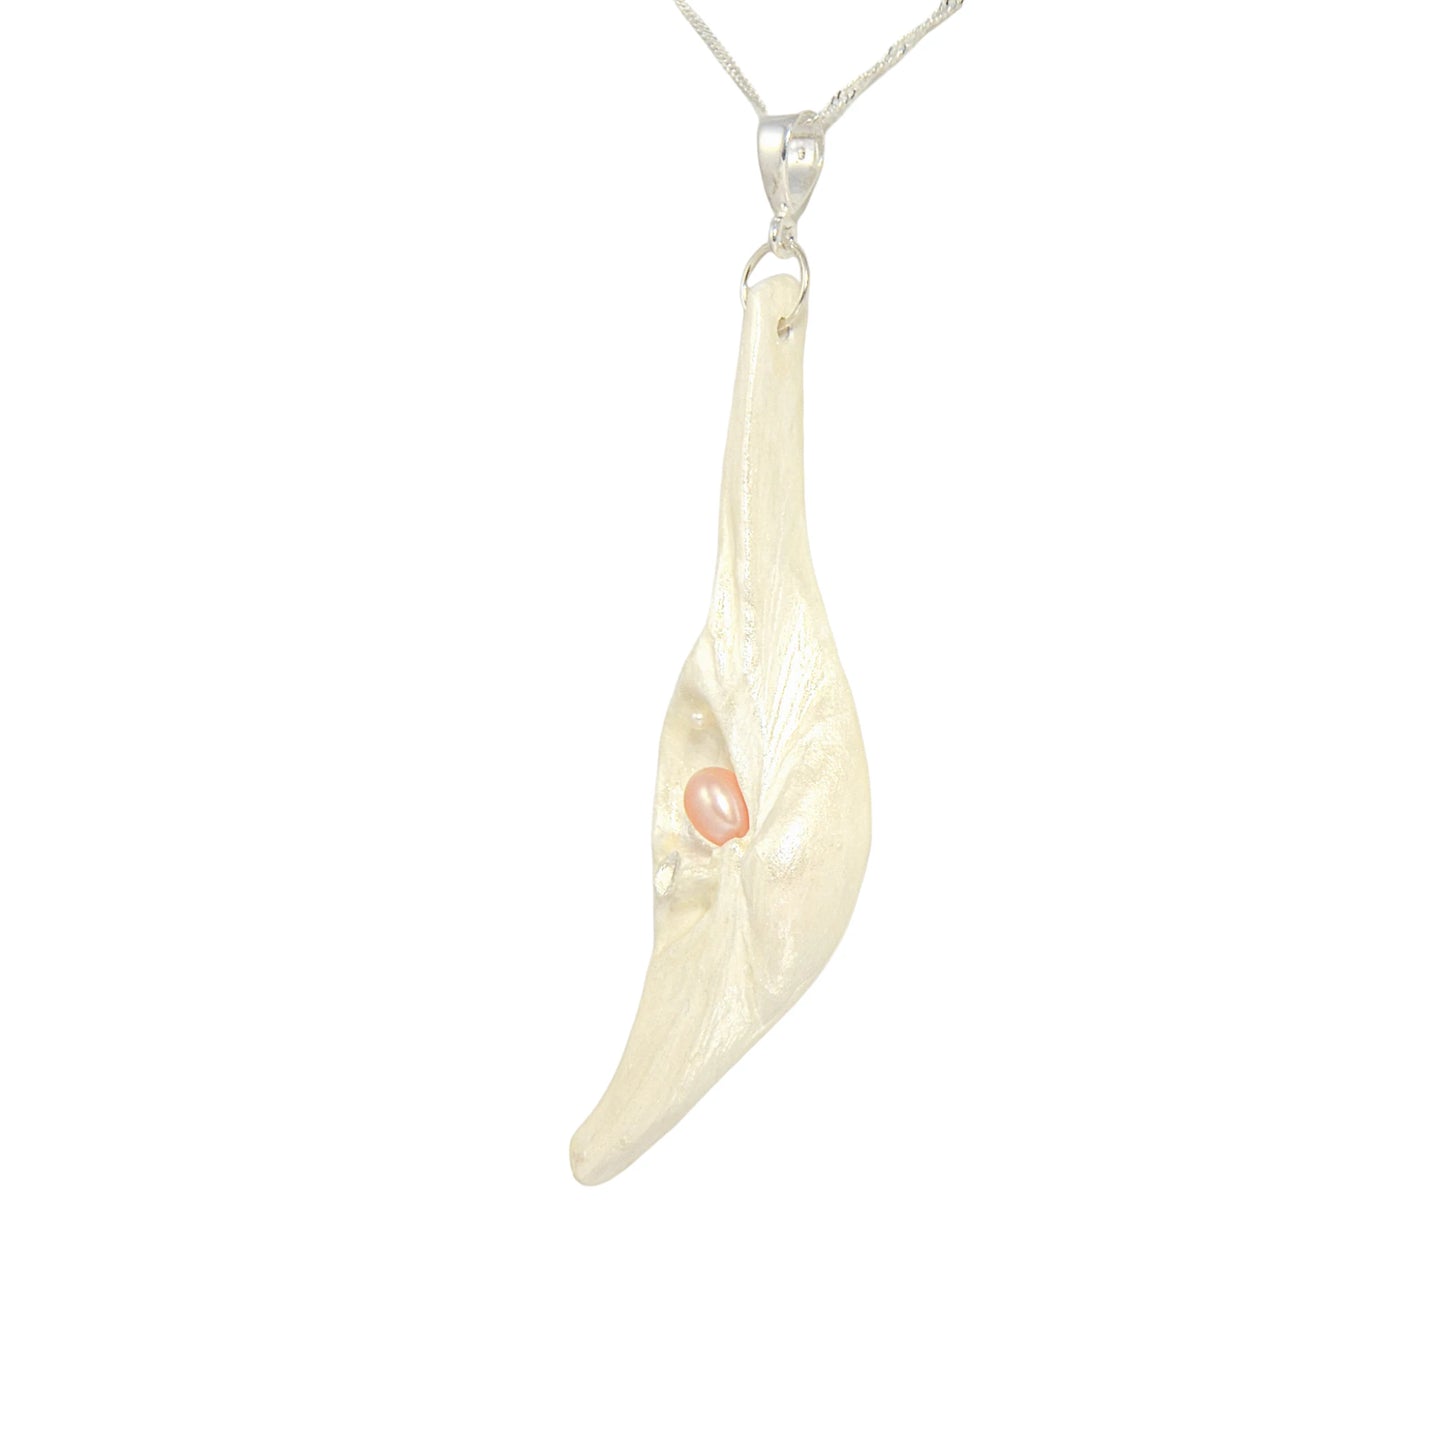 Nefertiti natural seashell and a real 8 mm pink freshwater Pearl, a baby pearl and a 5mm faceted Herkimer diamond compliments the pendant.